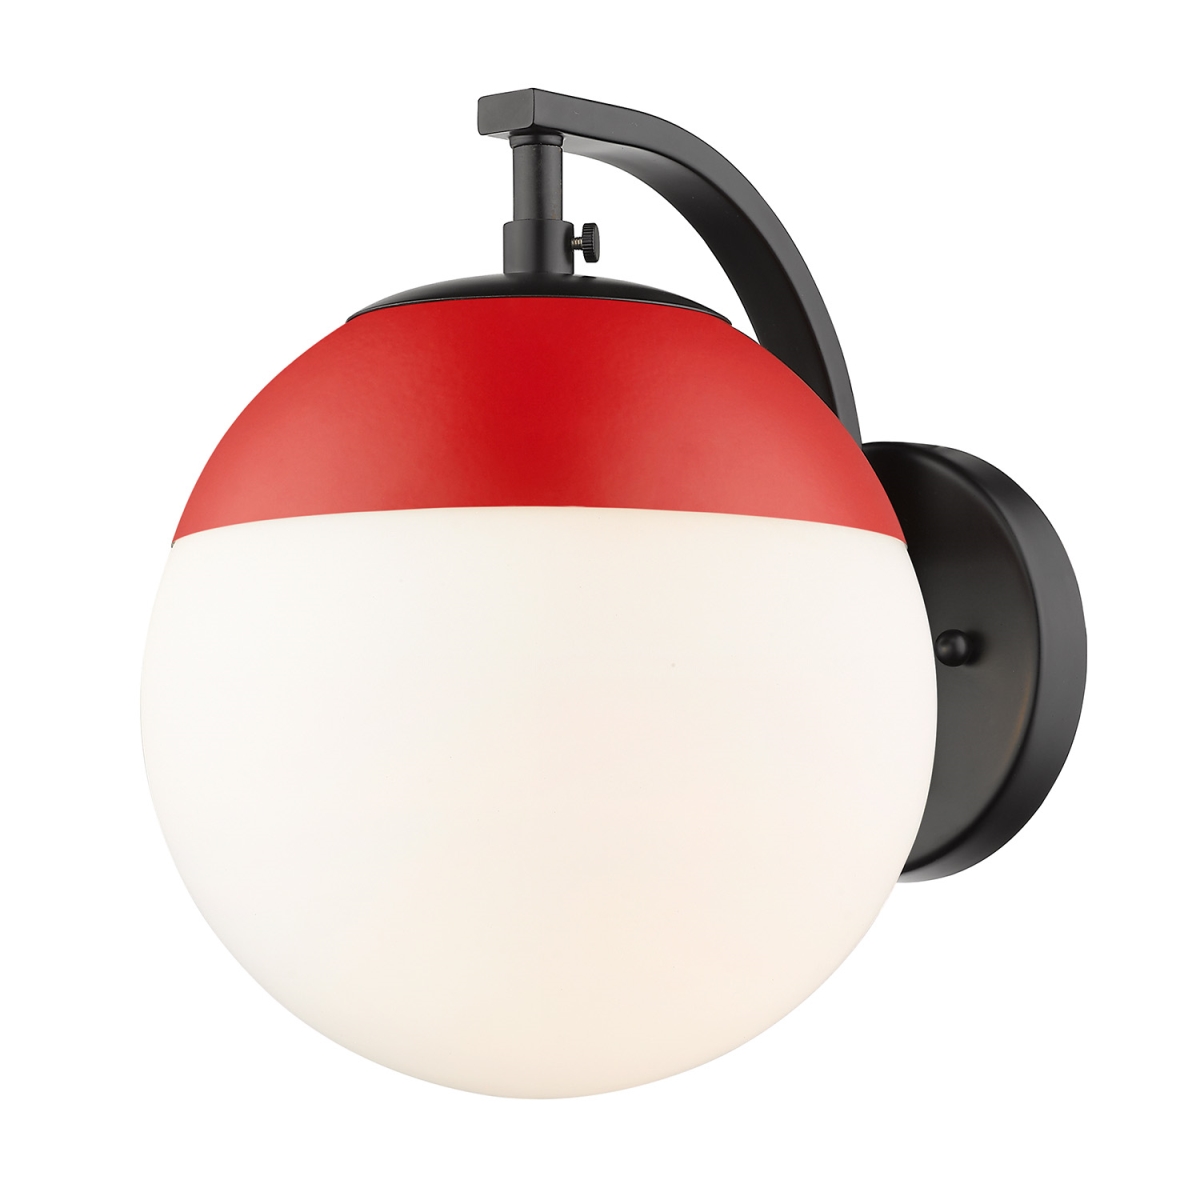 3218-1w Blk-red Dixon Sconce Light With Opal Glass & Red Cap, Black